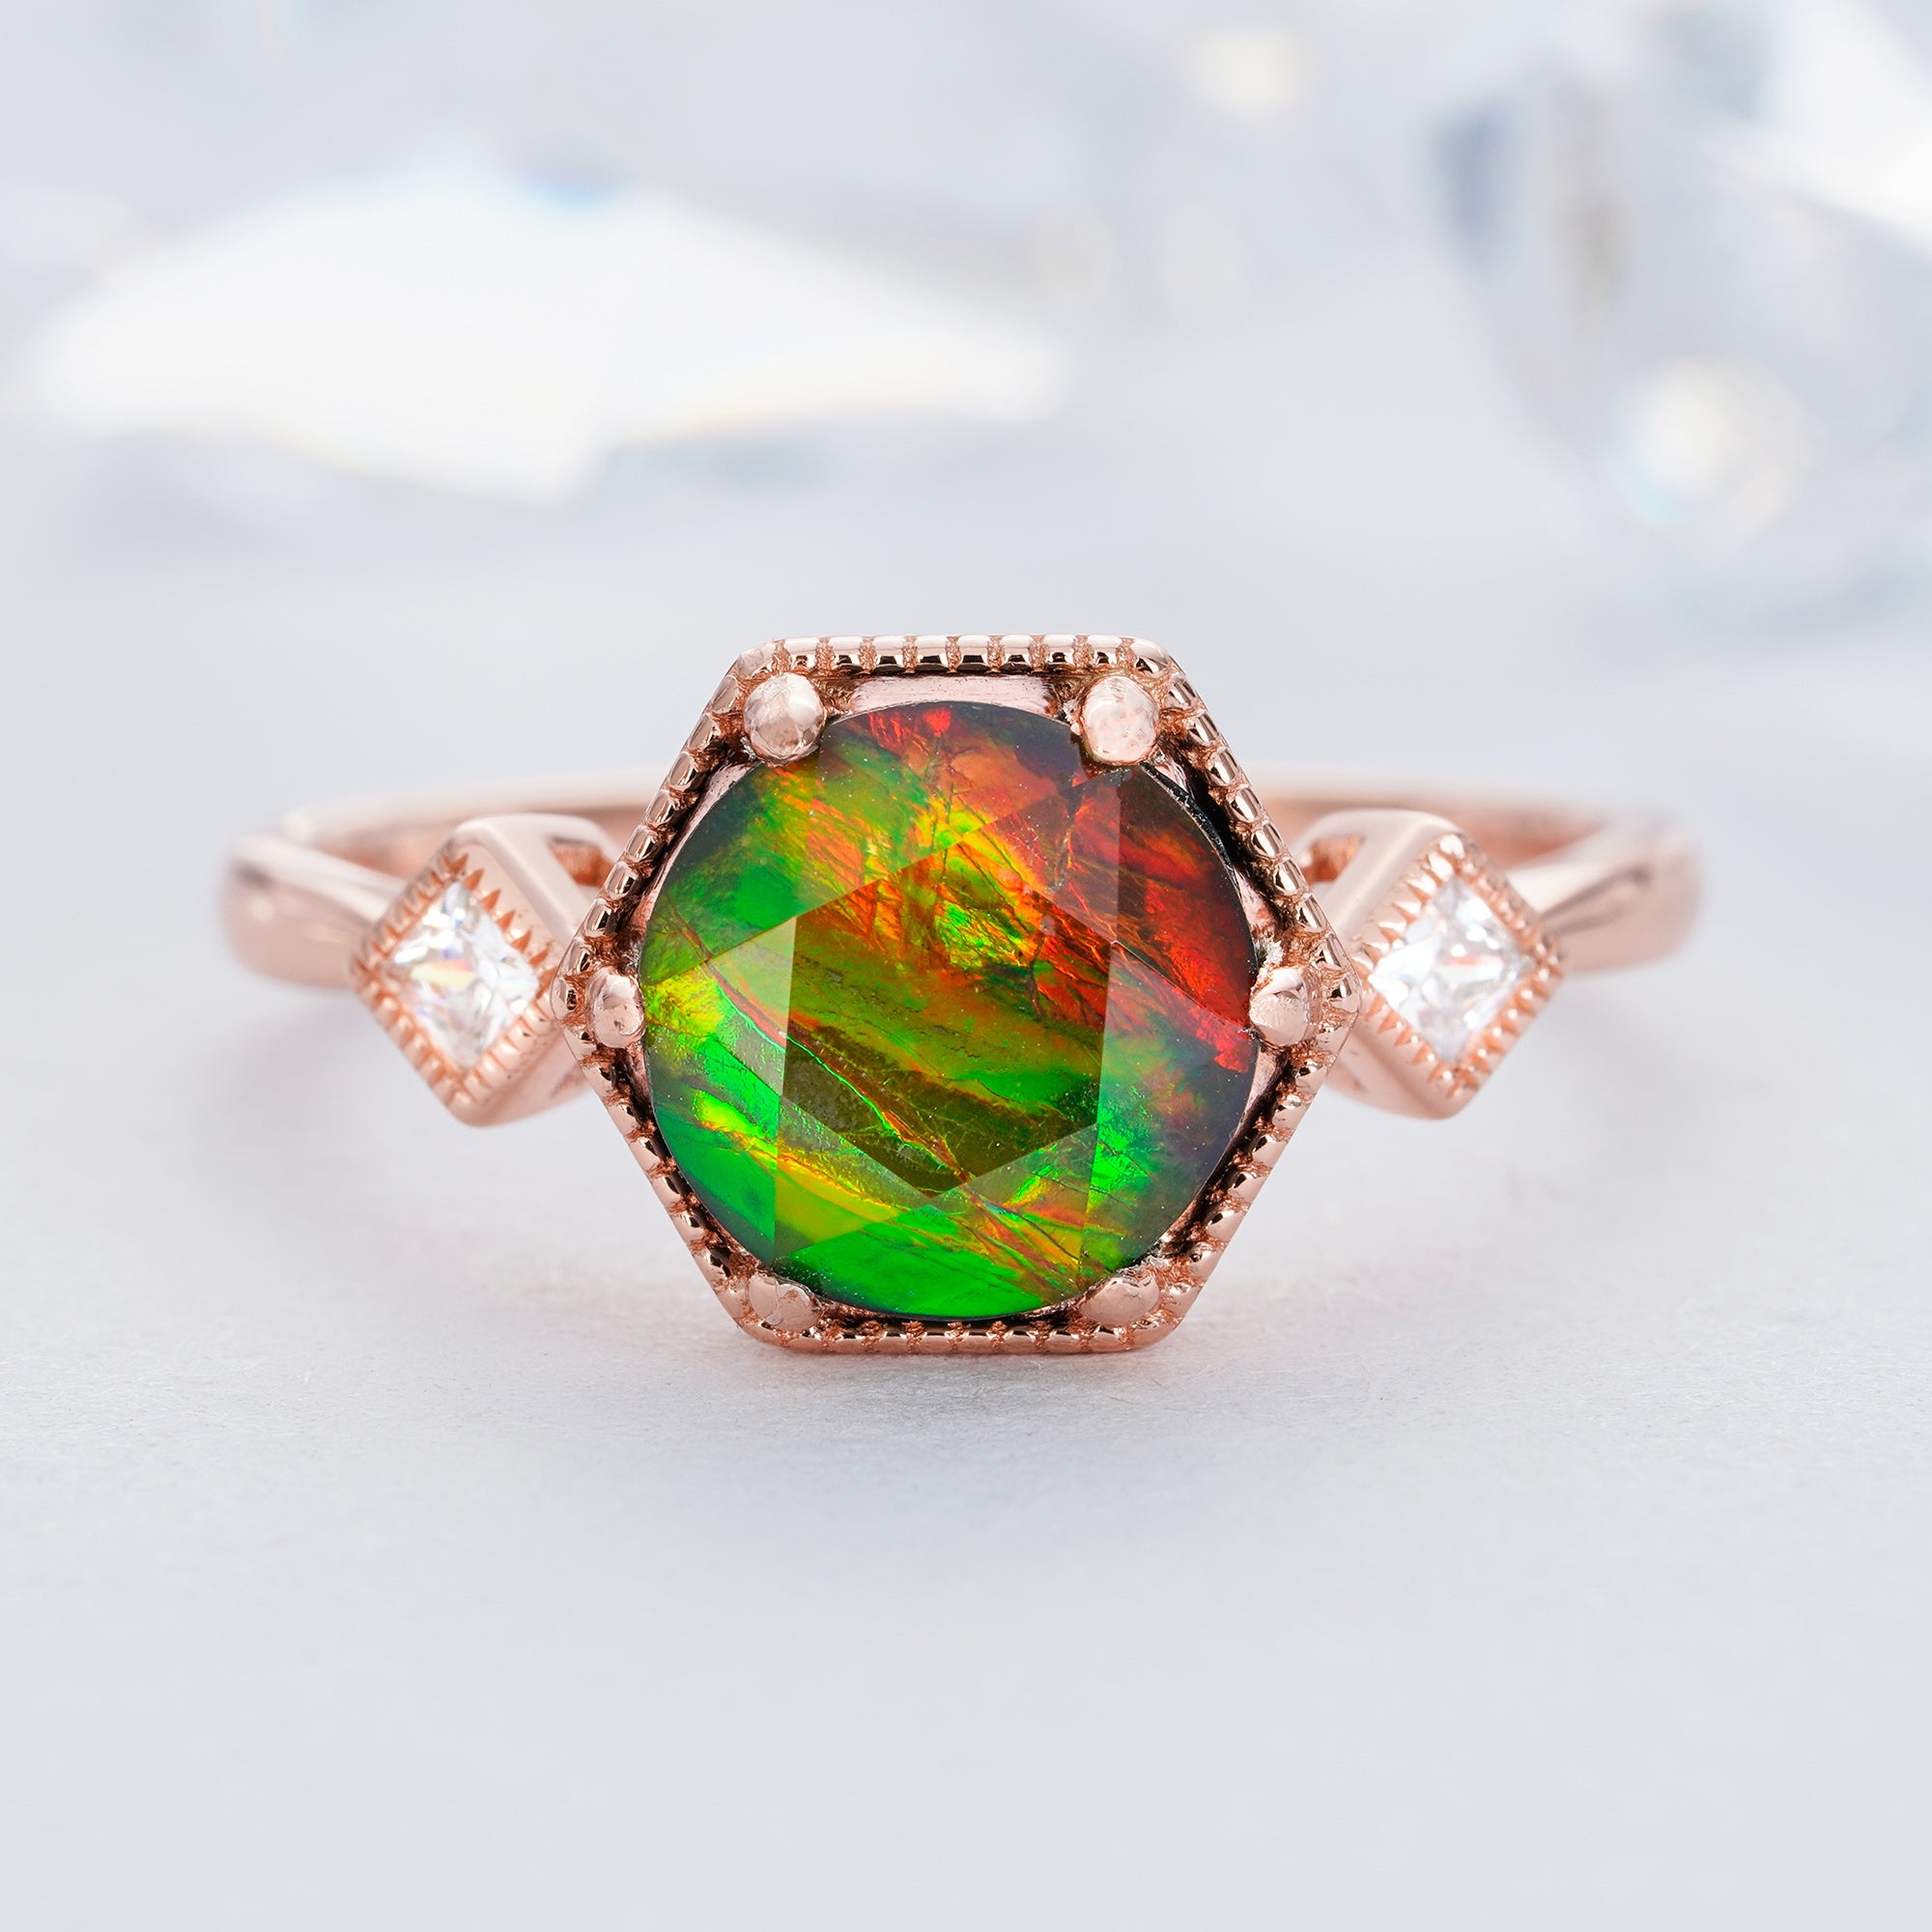 Jewellery - Rings - Canadian Ammolite Gems Sterling Silver 12mm Trillion  Ammolite and White Topaz Ring - Online Shopping for Canadians